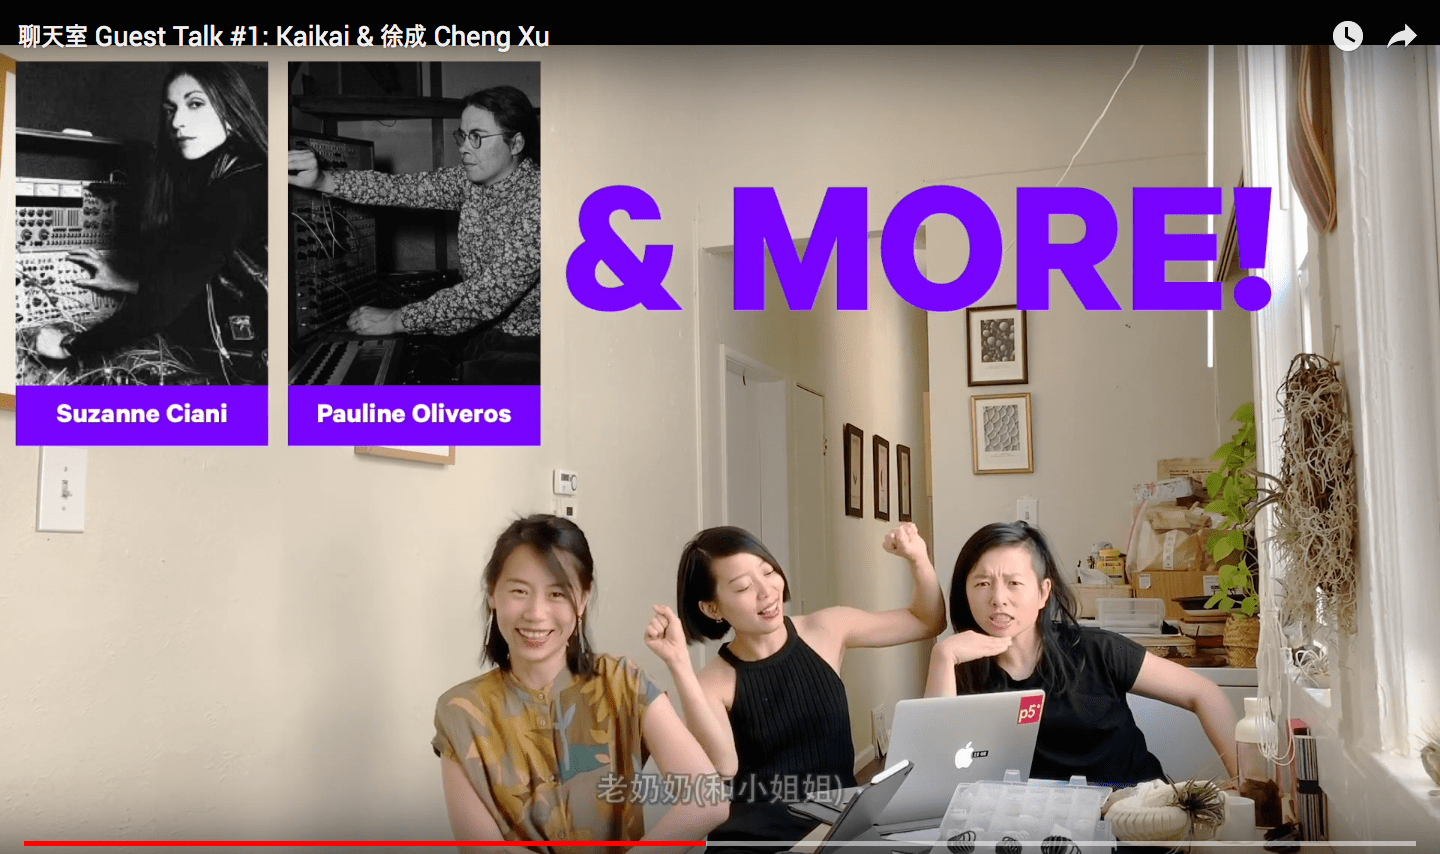 A screenshot of a Qtv video (Guest Talk #1) featuring Chinese womxn designers and artists Kaikai and Cheng Xu